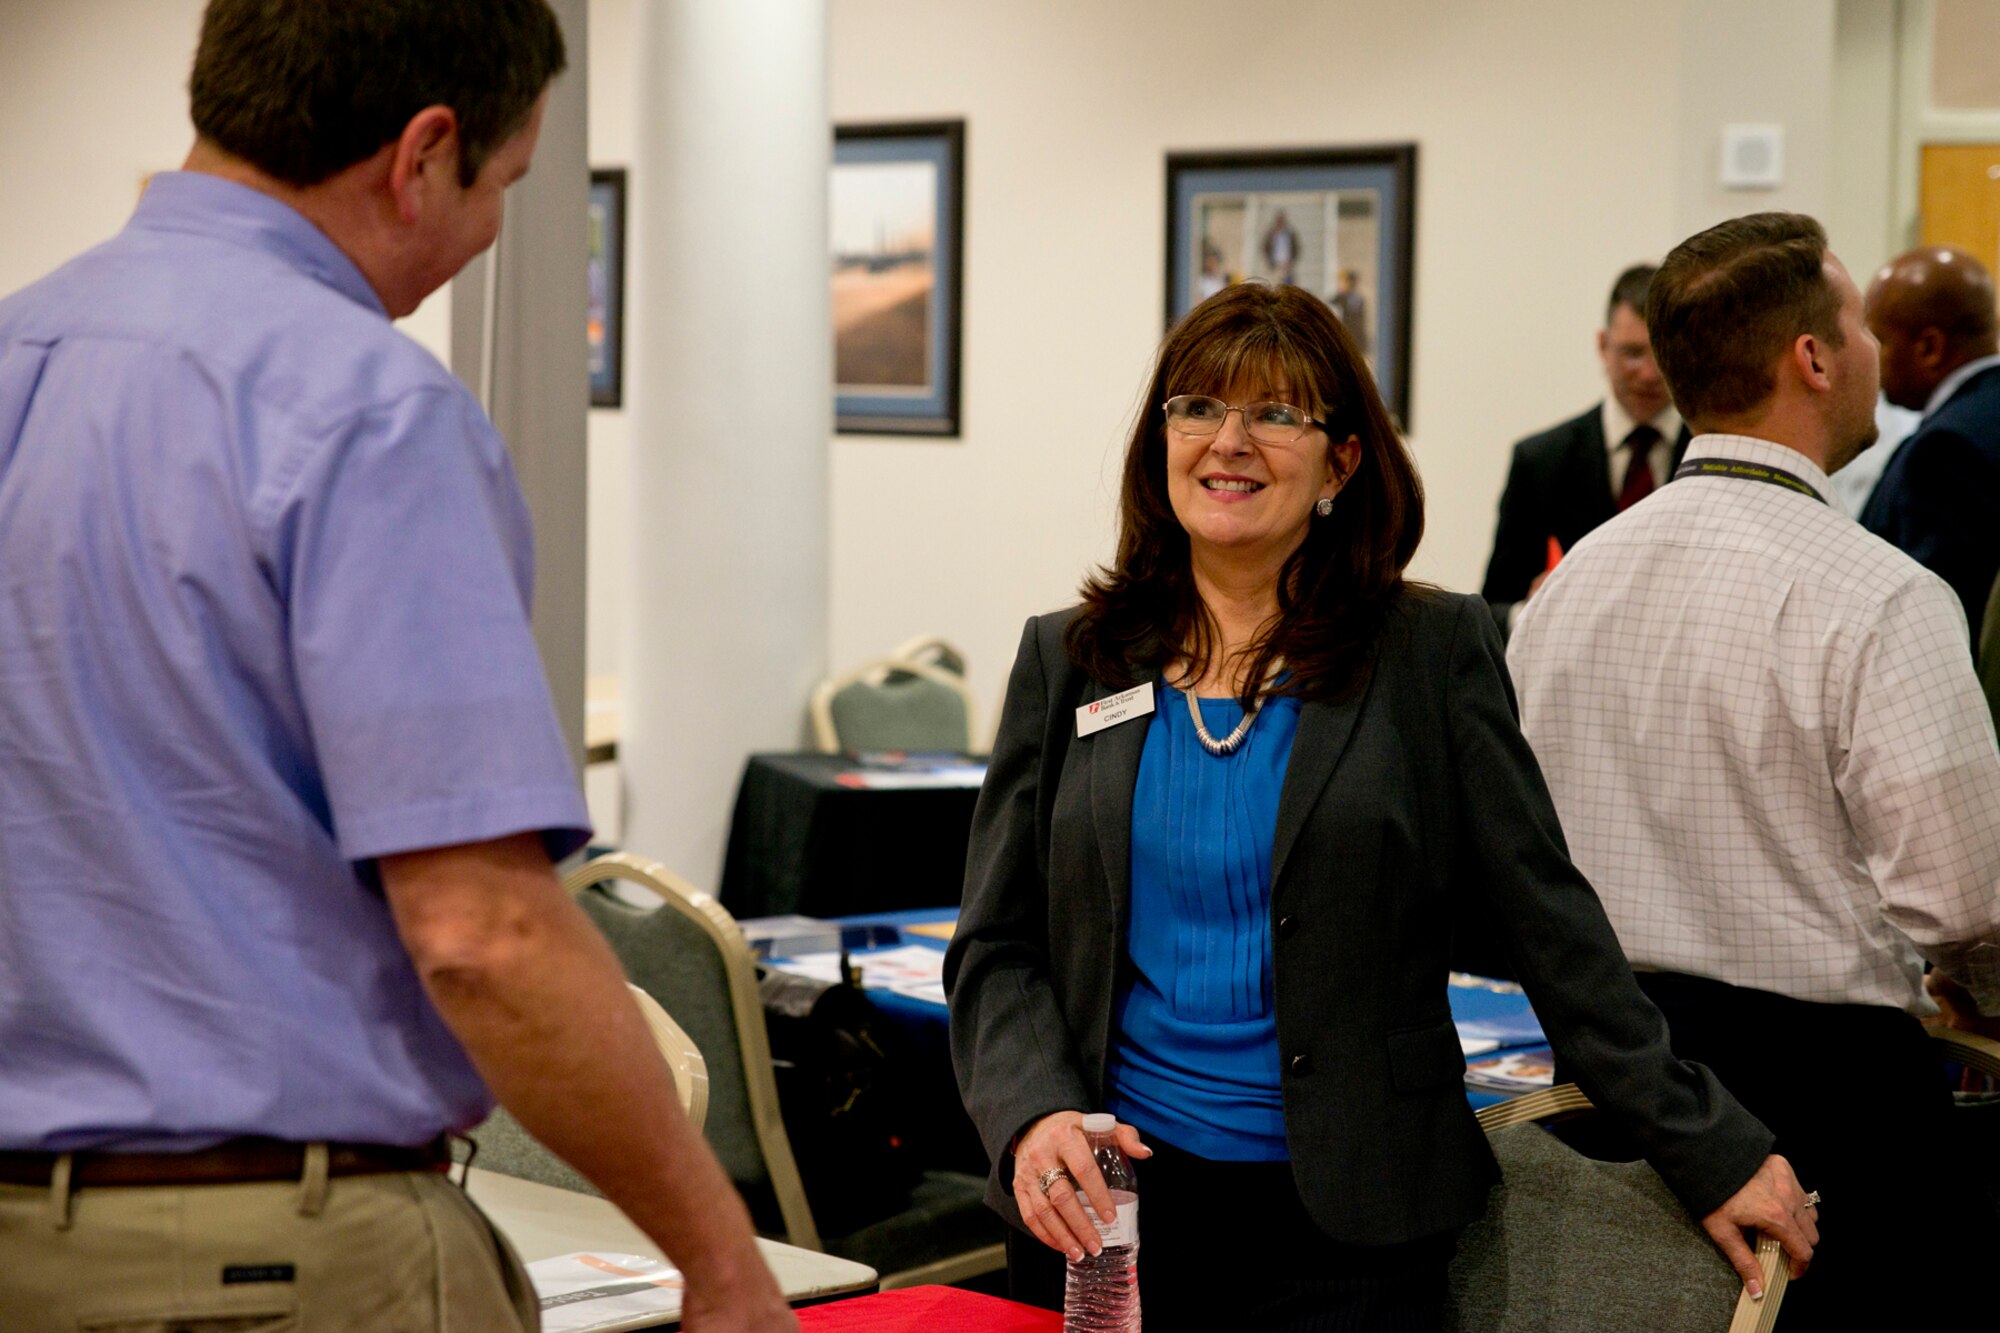 Cindy Wheeler, human resources benefits administrator, First Arkansas Bank & Trust, speaks with a job seeker at the Military Hiring Fair held in the Walters Community Support Center March 30, 2017, at Little Rock Air Force Base, Ark. Human Resource Recruiters from FAB&T joined approximately 100 recruiters from more than 70 businesses looking for prospective employees to fill for positions from all over the area. (U.S. Air Force photo by Master Sgt. Jeff Walston/Released)